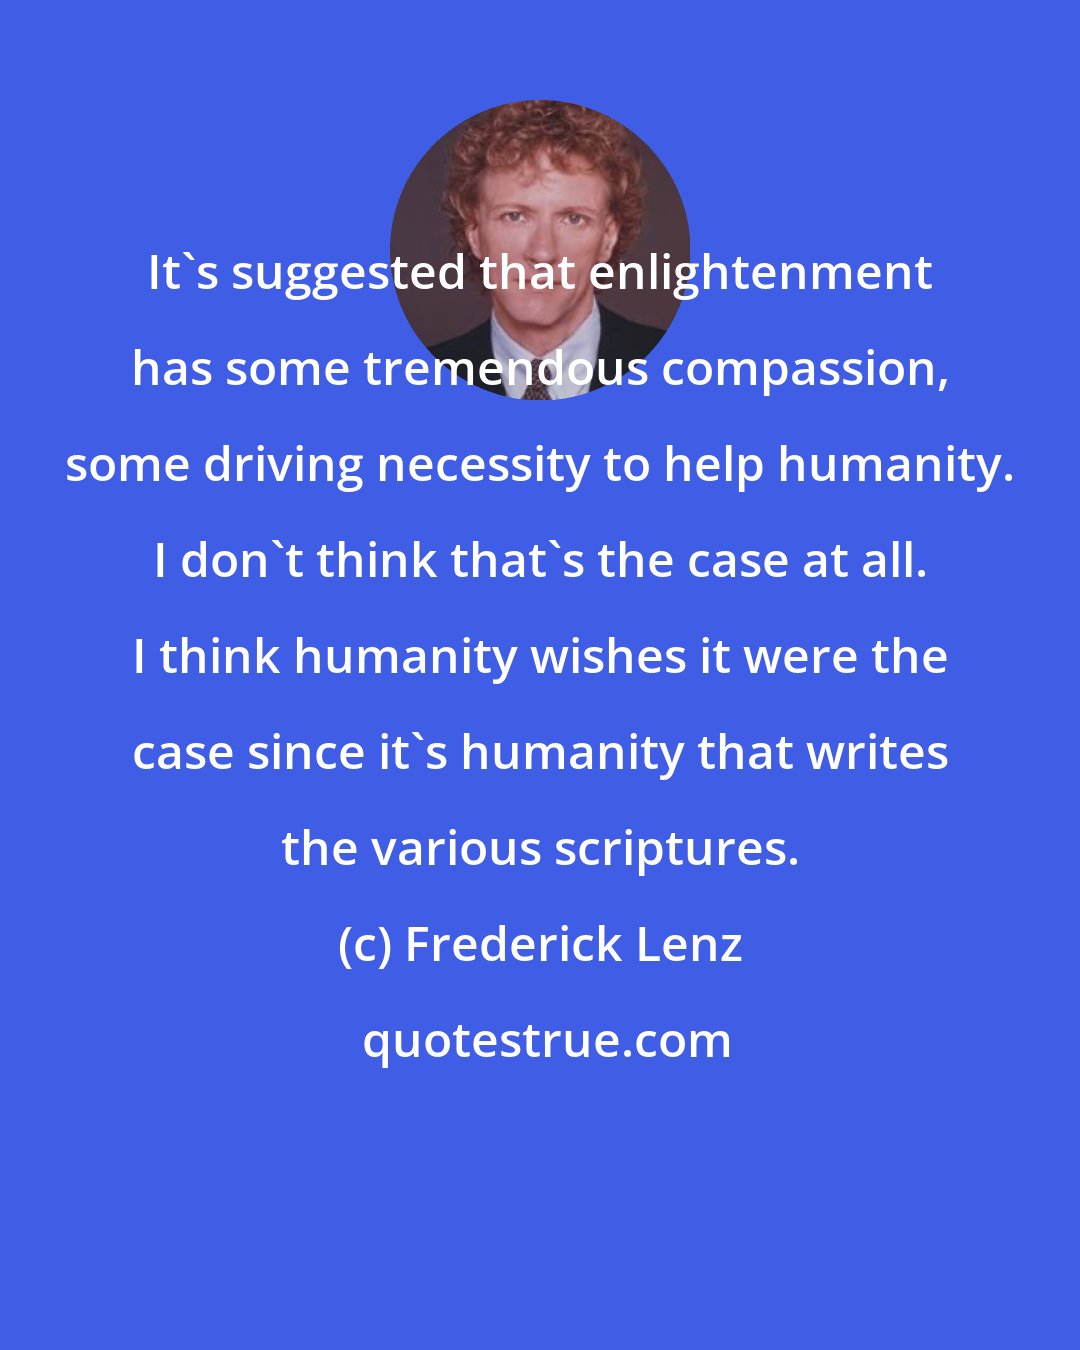 Frederick Lenz: It's suggested that enlightenment has some tremendous compassion, some driving necessity to help humanity. I don't think that's the case at all. I think humanity wishes it were the case since it's humanity that writes the various scriptures.